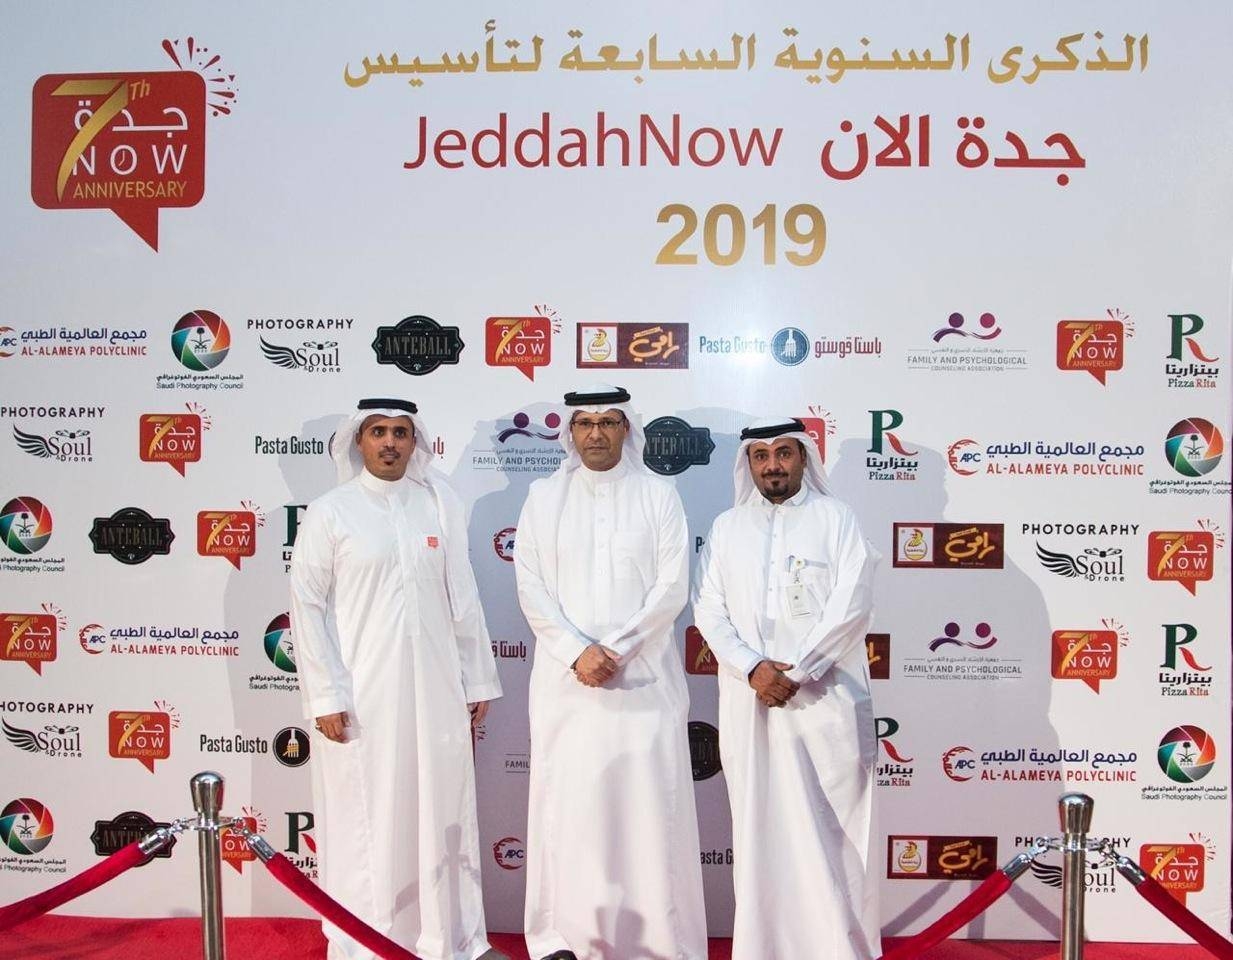 The Jeddah Now account was completely revamped in December 2012. — Courtesy photo